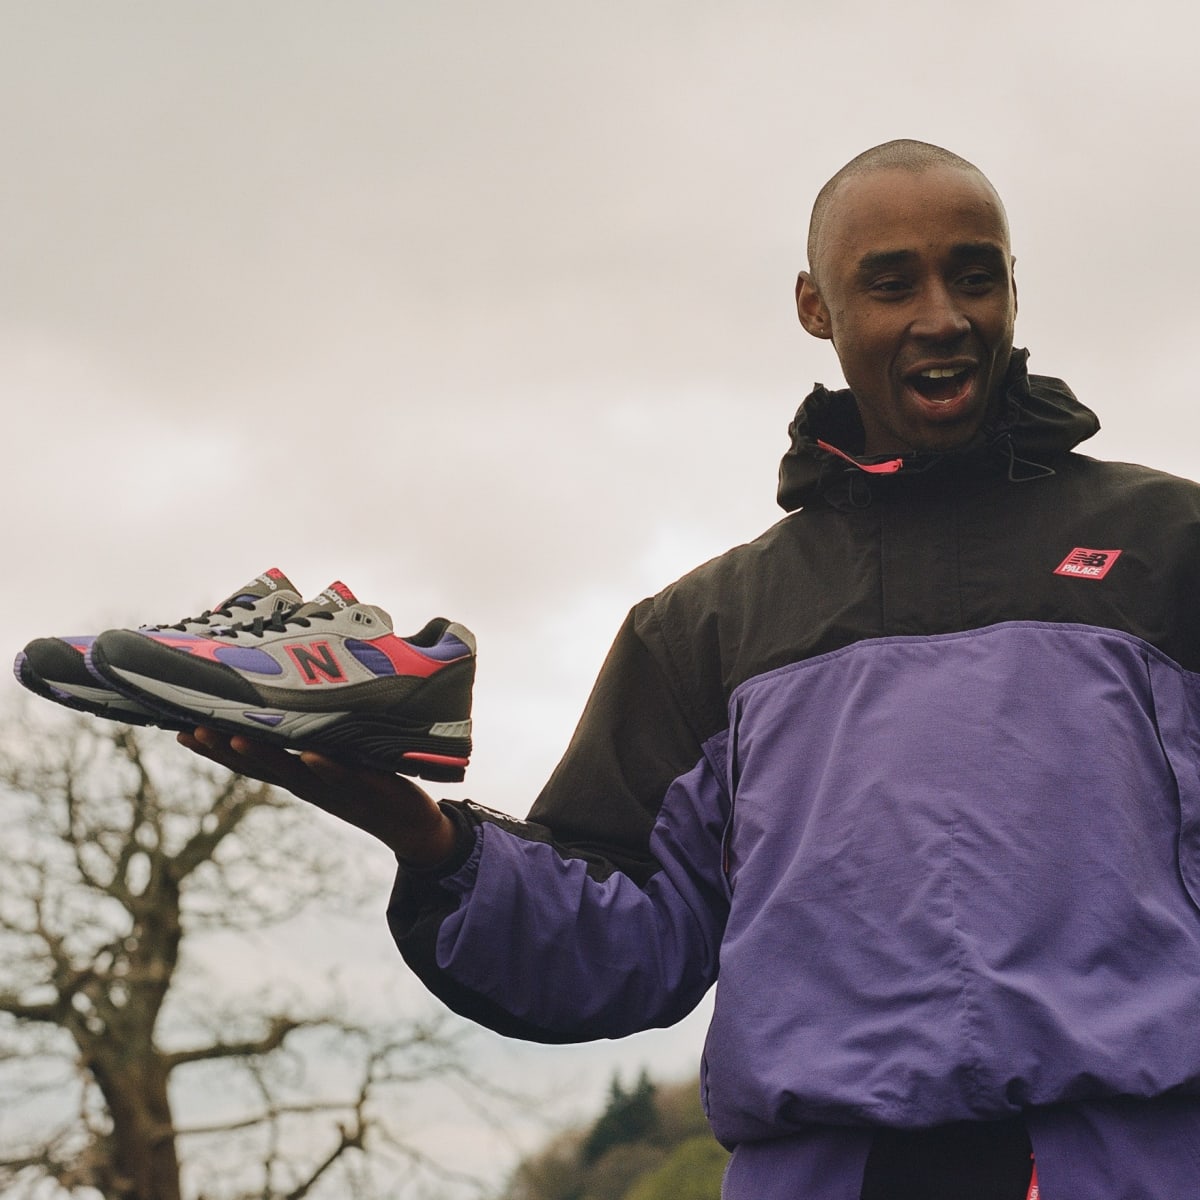 New Balance & Palace Find Fire With The MADE in UK 991 - Sports